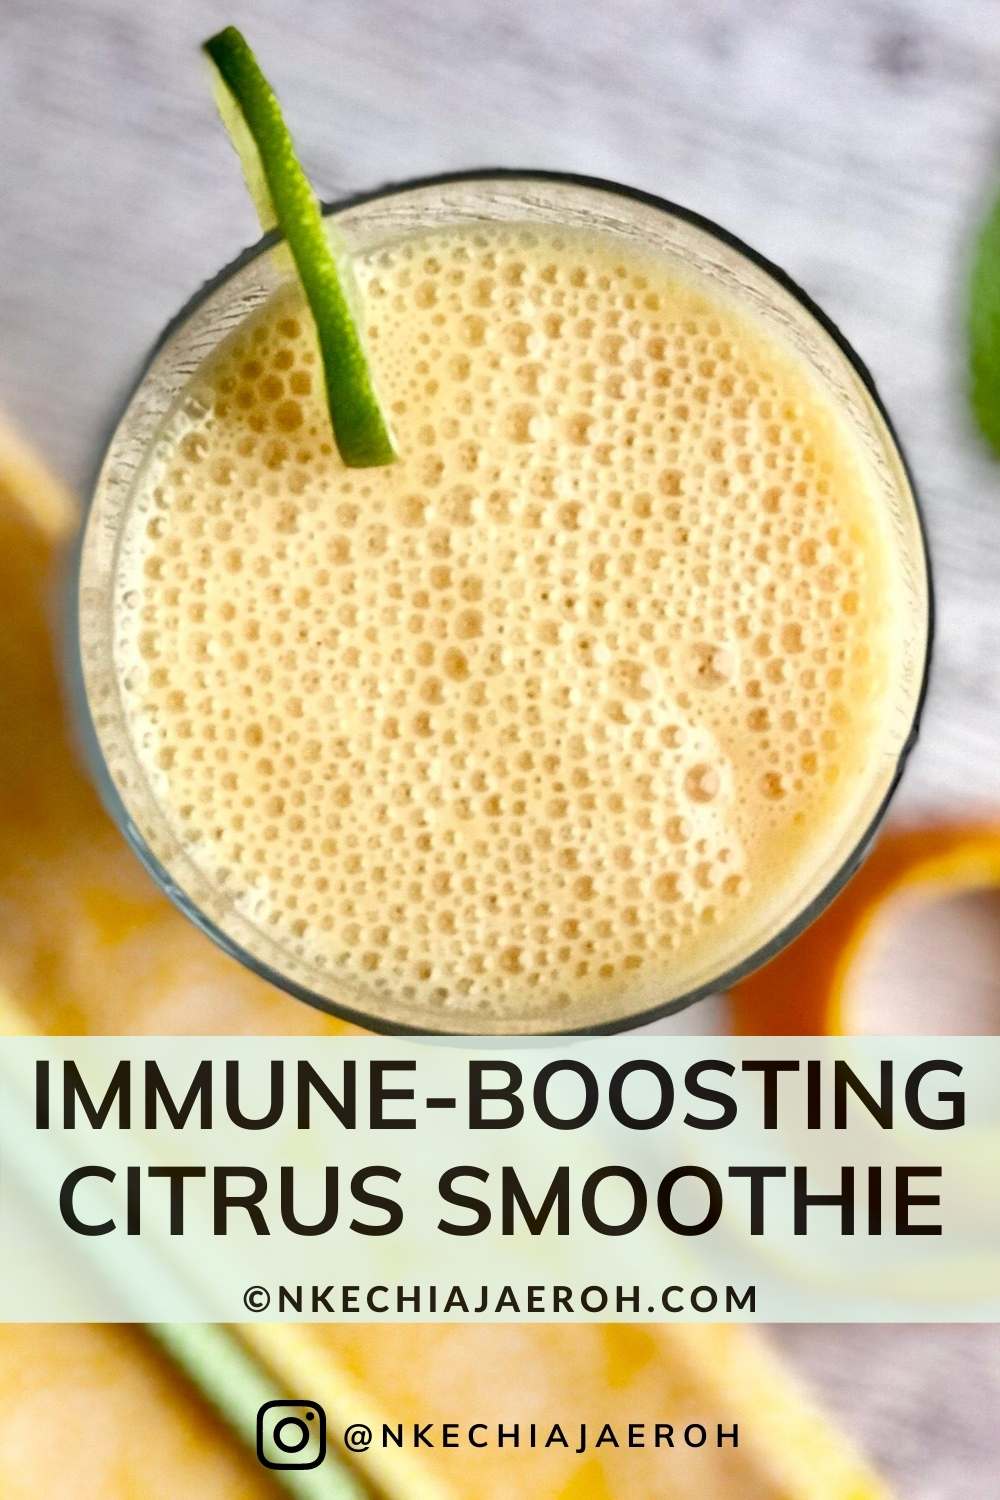 Immune-Boosting Citrus smoothie; Vitamin C Smoothie Recipe. The Best breakfast smoothie (Vegan, gluten-free, low carb) Healthy Vitamin C smoothie made with orange, grapefruit, lemon, banana, plant-based yogurt, and almond milk Citrus is nature's own powerful immune booster, so this immune-boosting citrus smoothie helps the body's defense against infections and re-infections. We need our food to support the immune system like this citrus smoothie. #immuneboostingsmoothie #immunitysupport